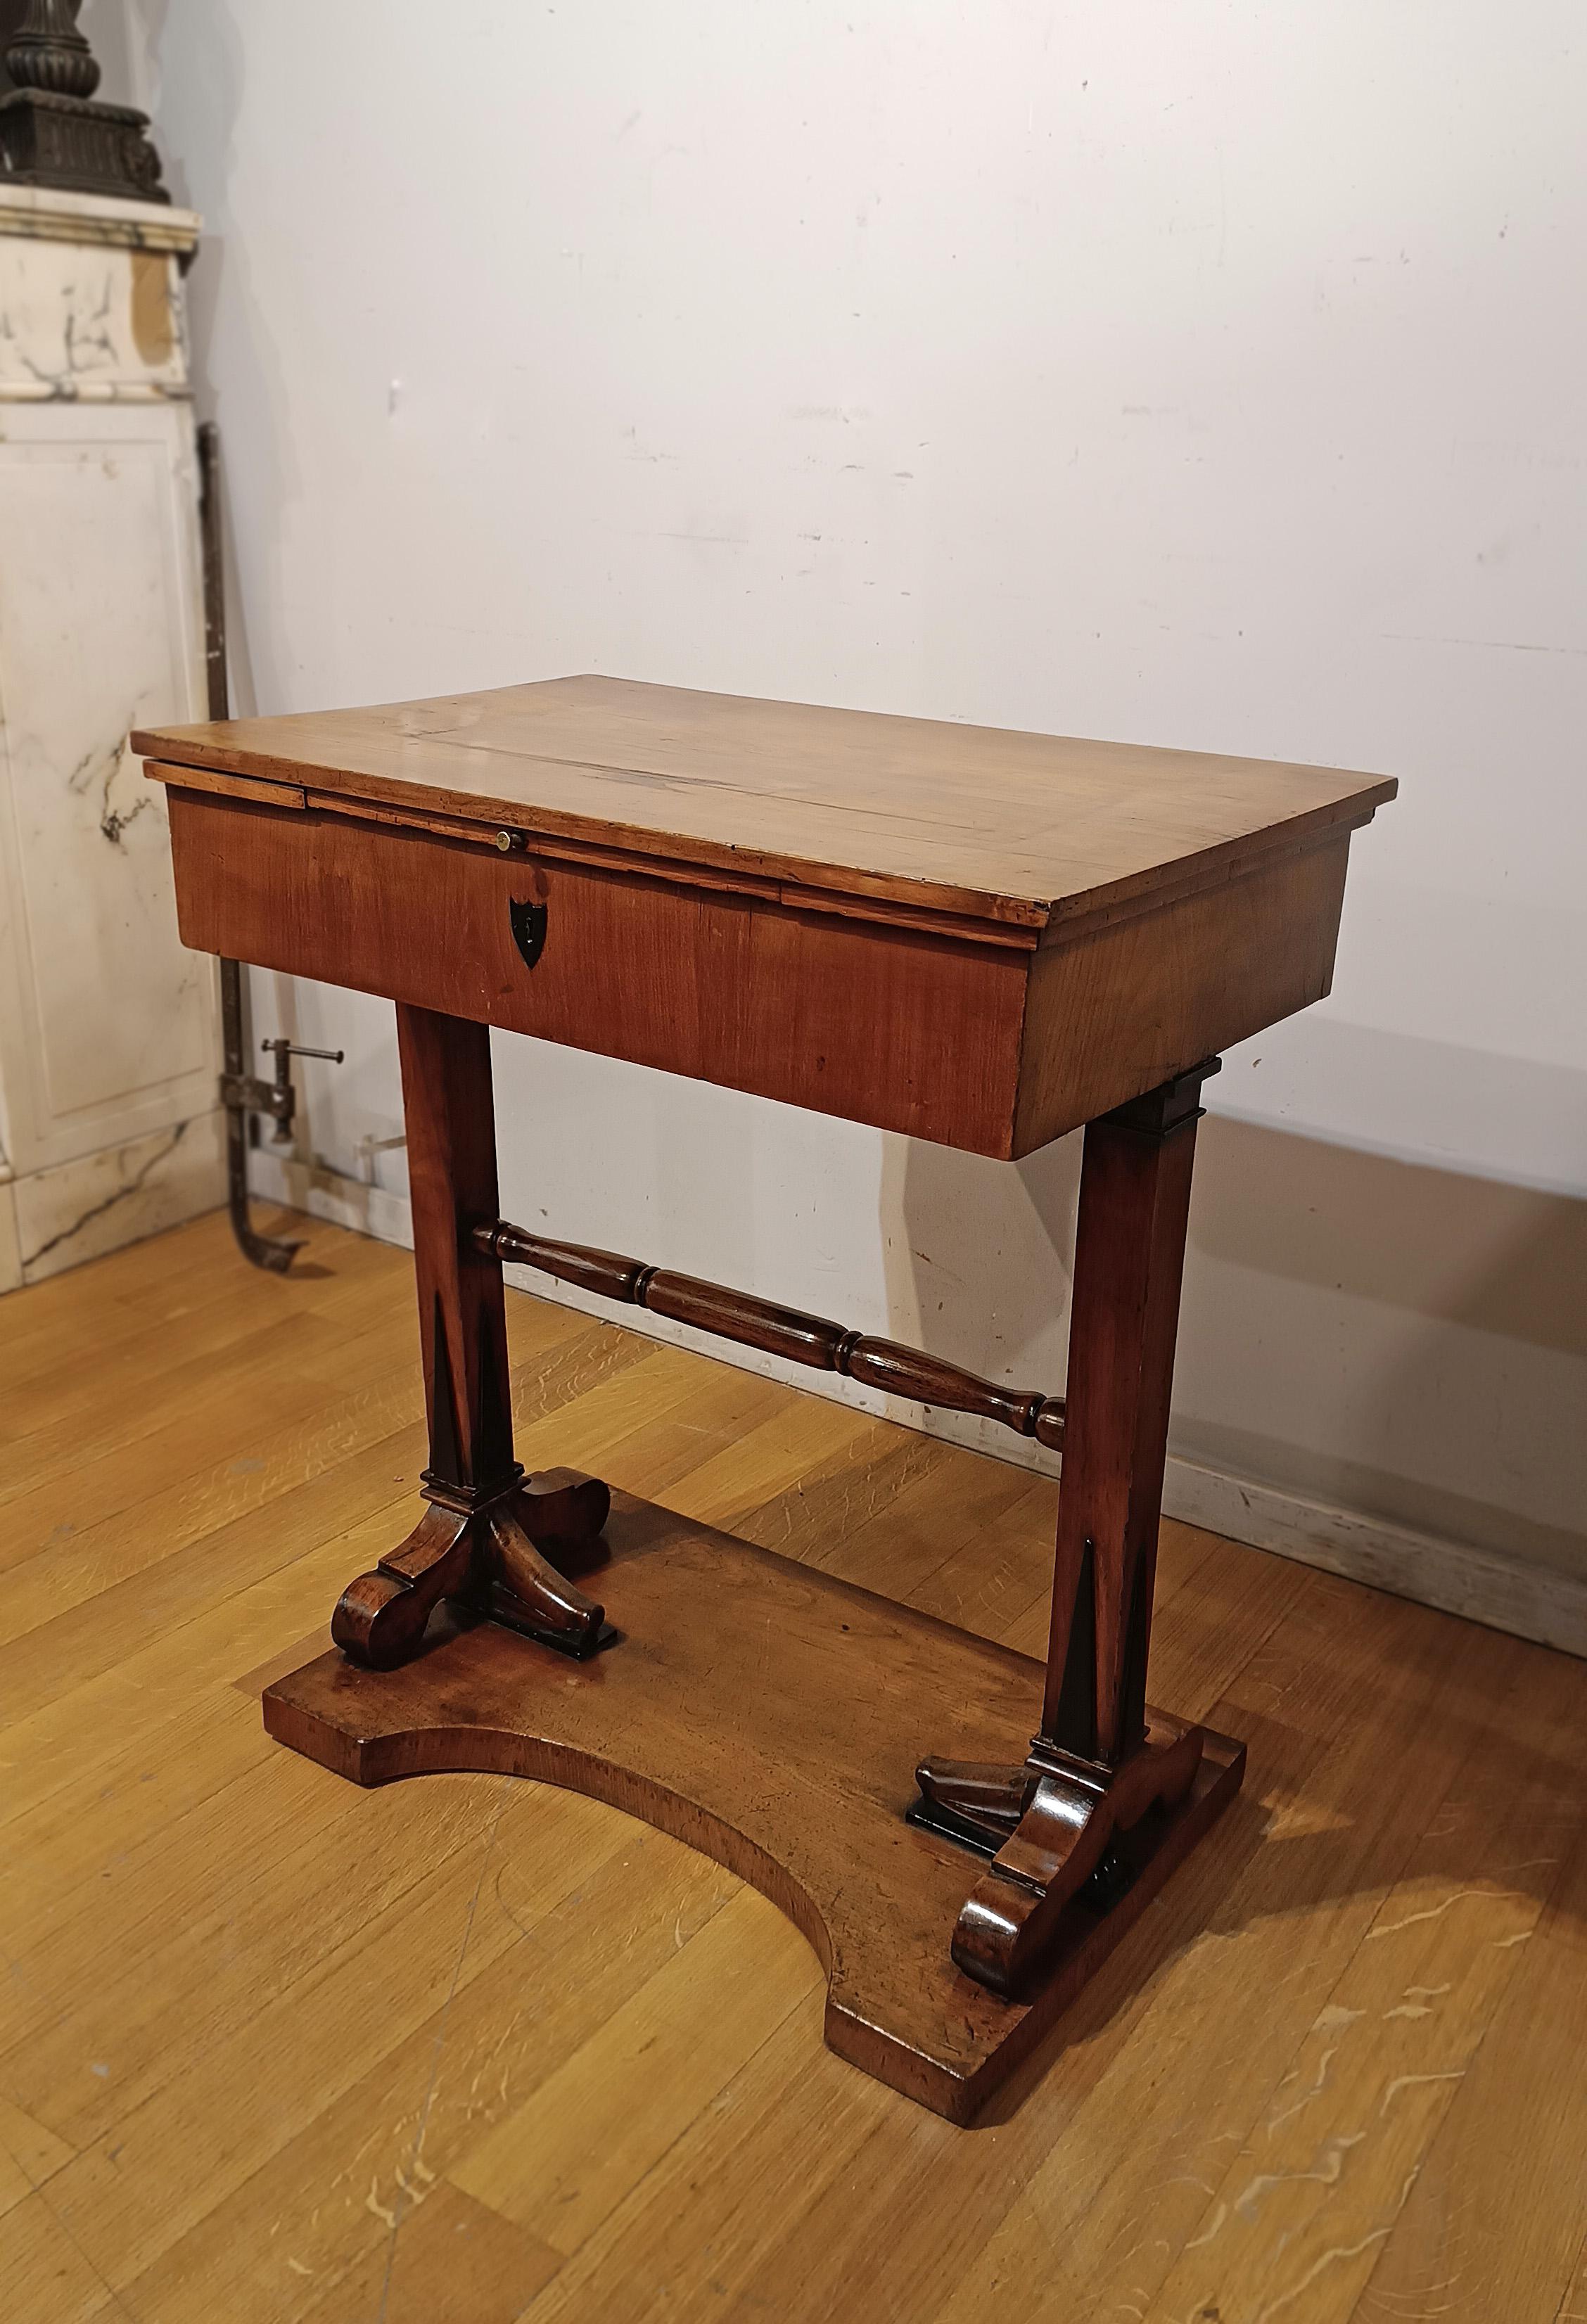 EARLY 19th CENTURY SMALL WORKING TABLE For Sale 3